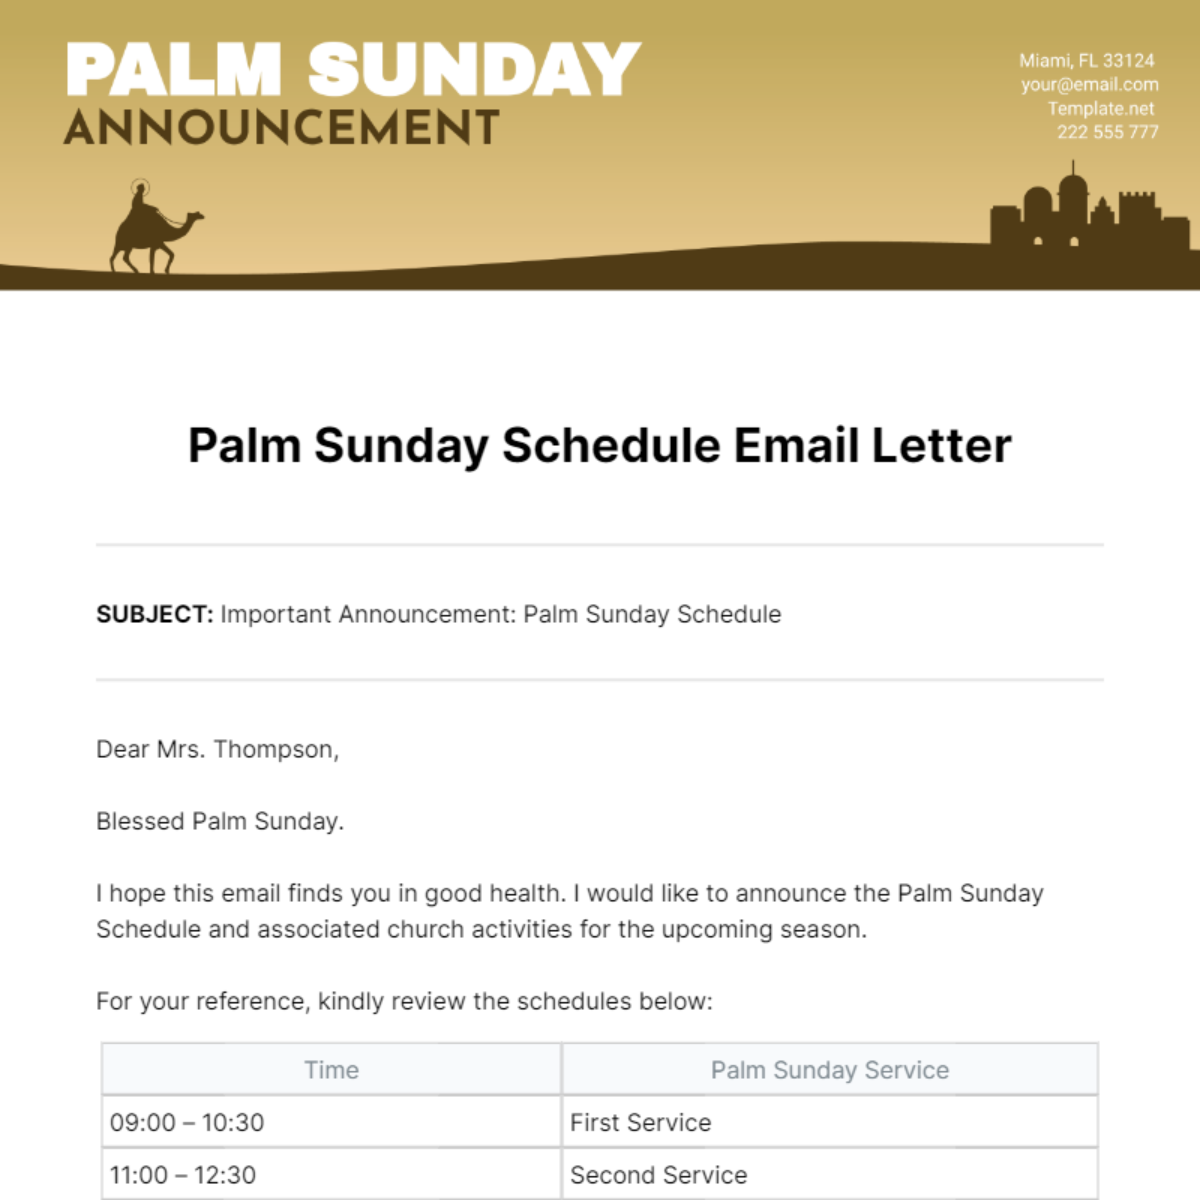 Free Important Announcement: Palm Sunday Schedule Email Letter Template